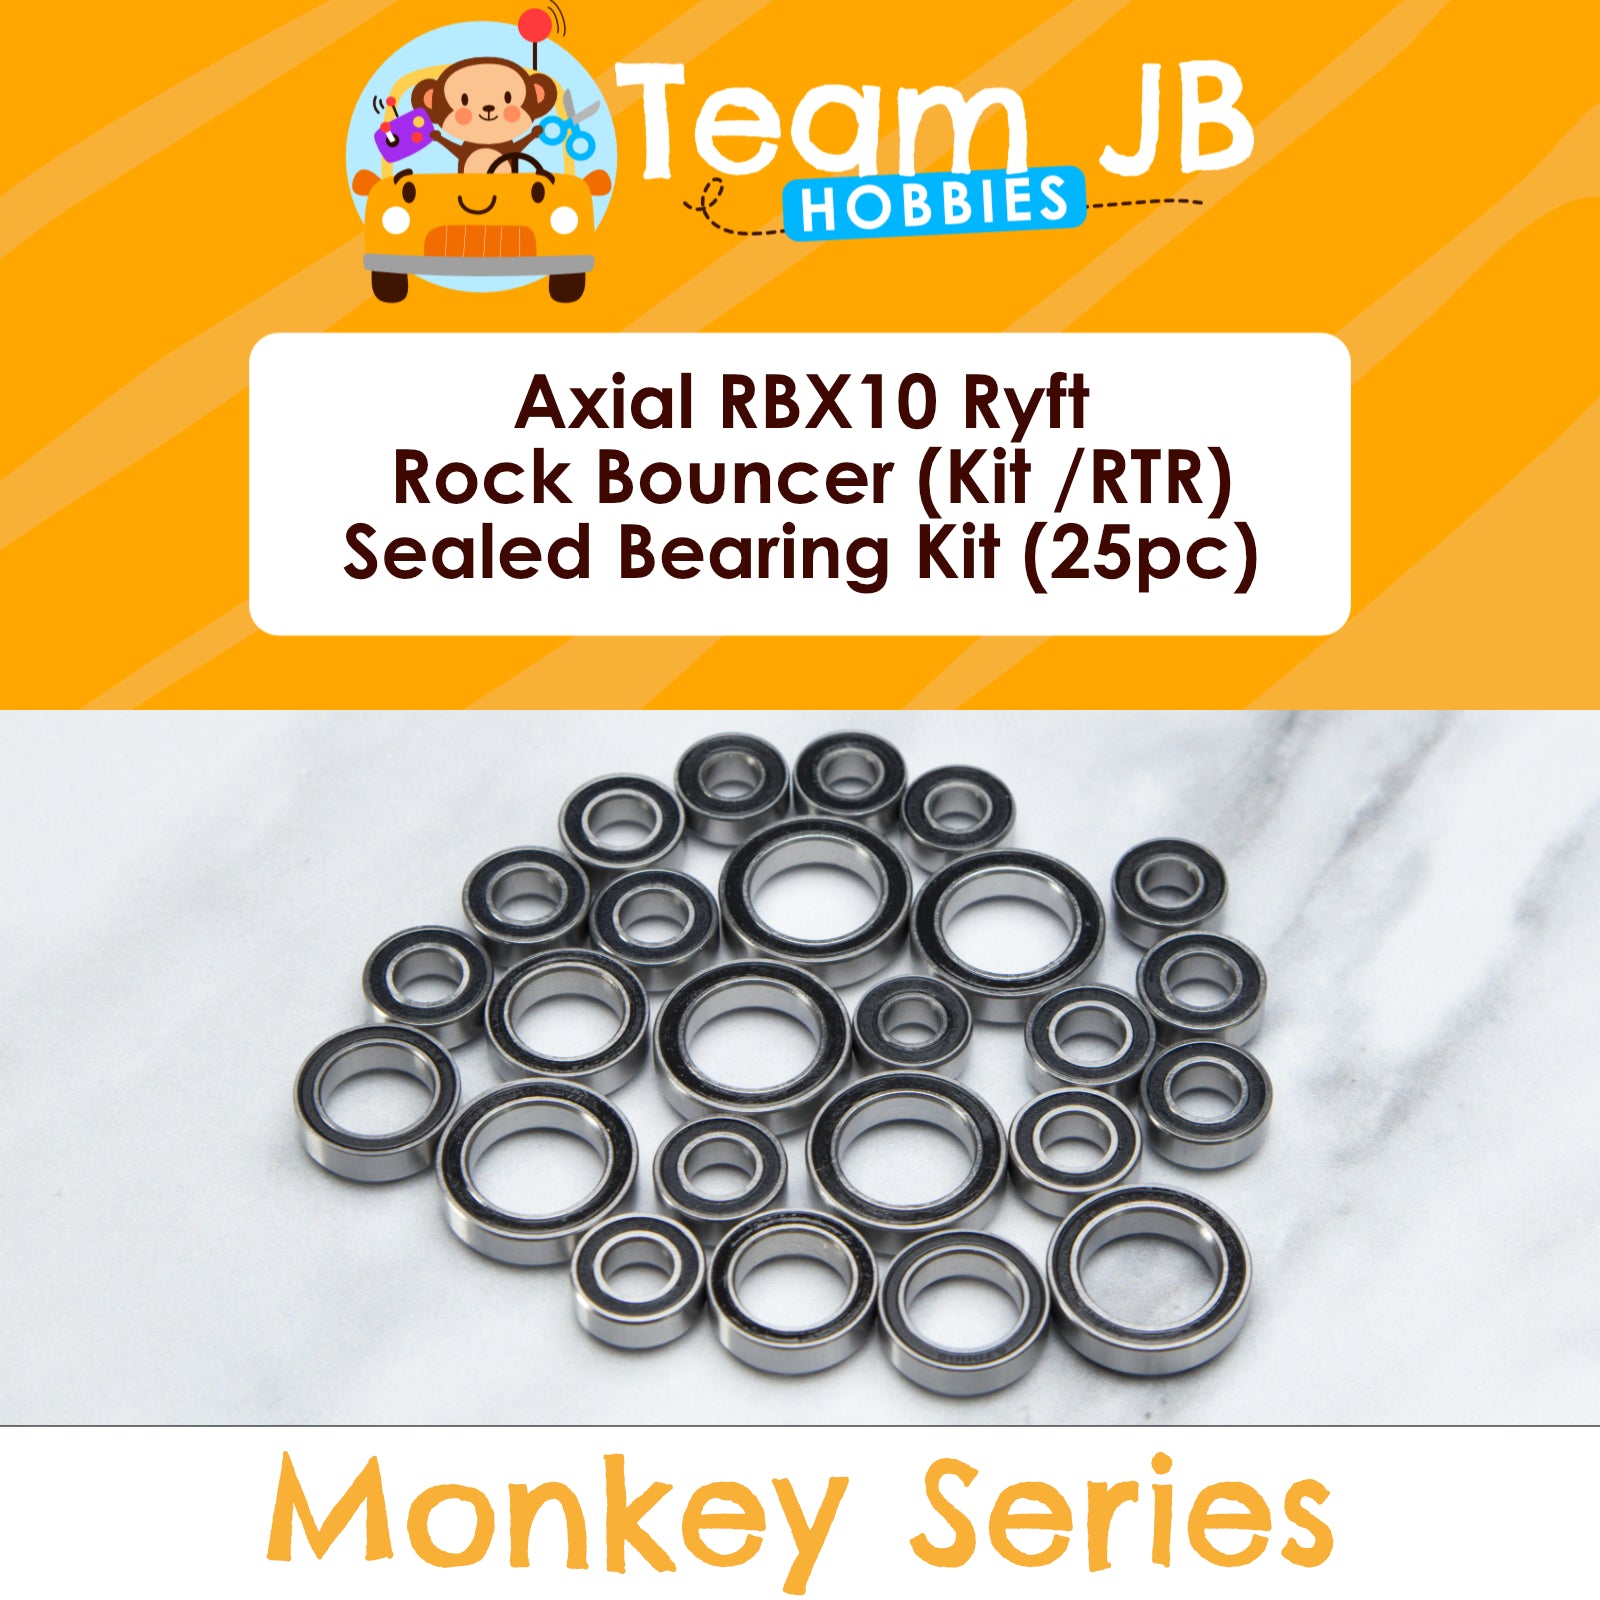 Axial RBX10 Ryft Rock Bouncer (Kit /RTR) - Sealed Bearing Kit